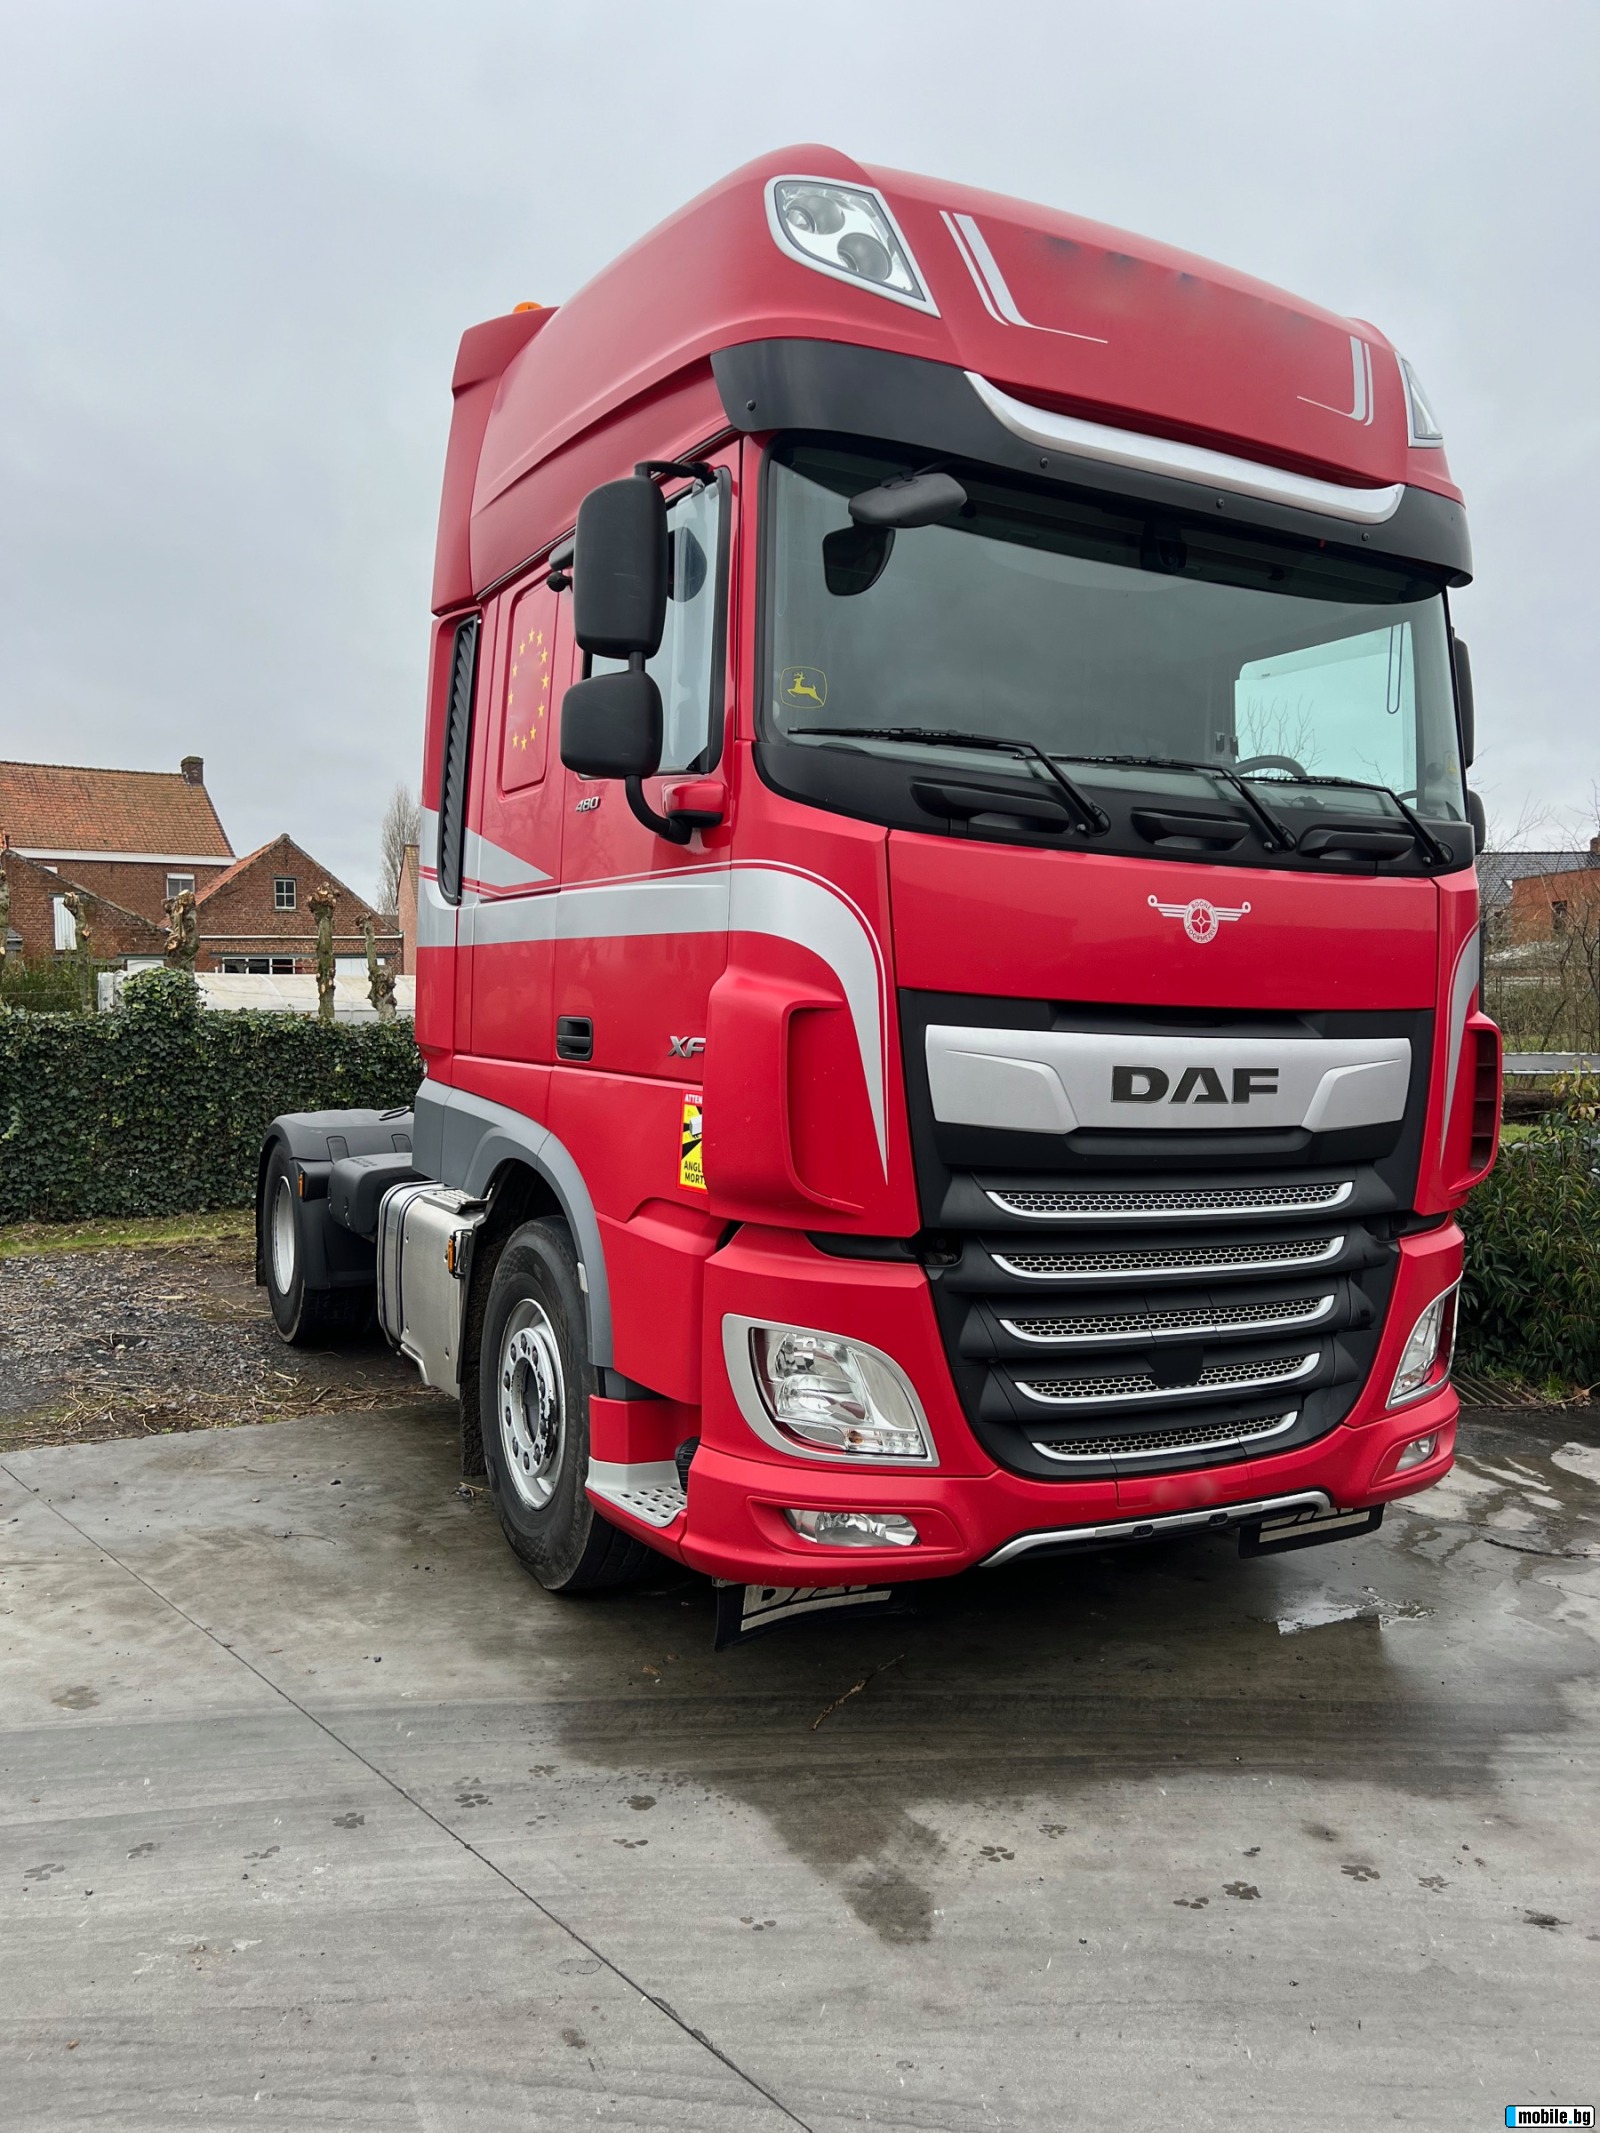 Daf FT XF 106  480 SUPERSPACECAB | Mobile.bg   2